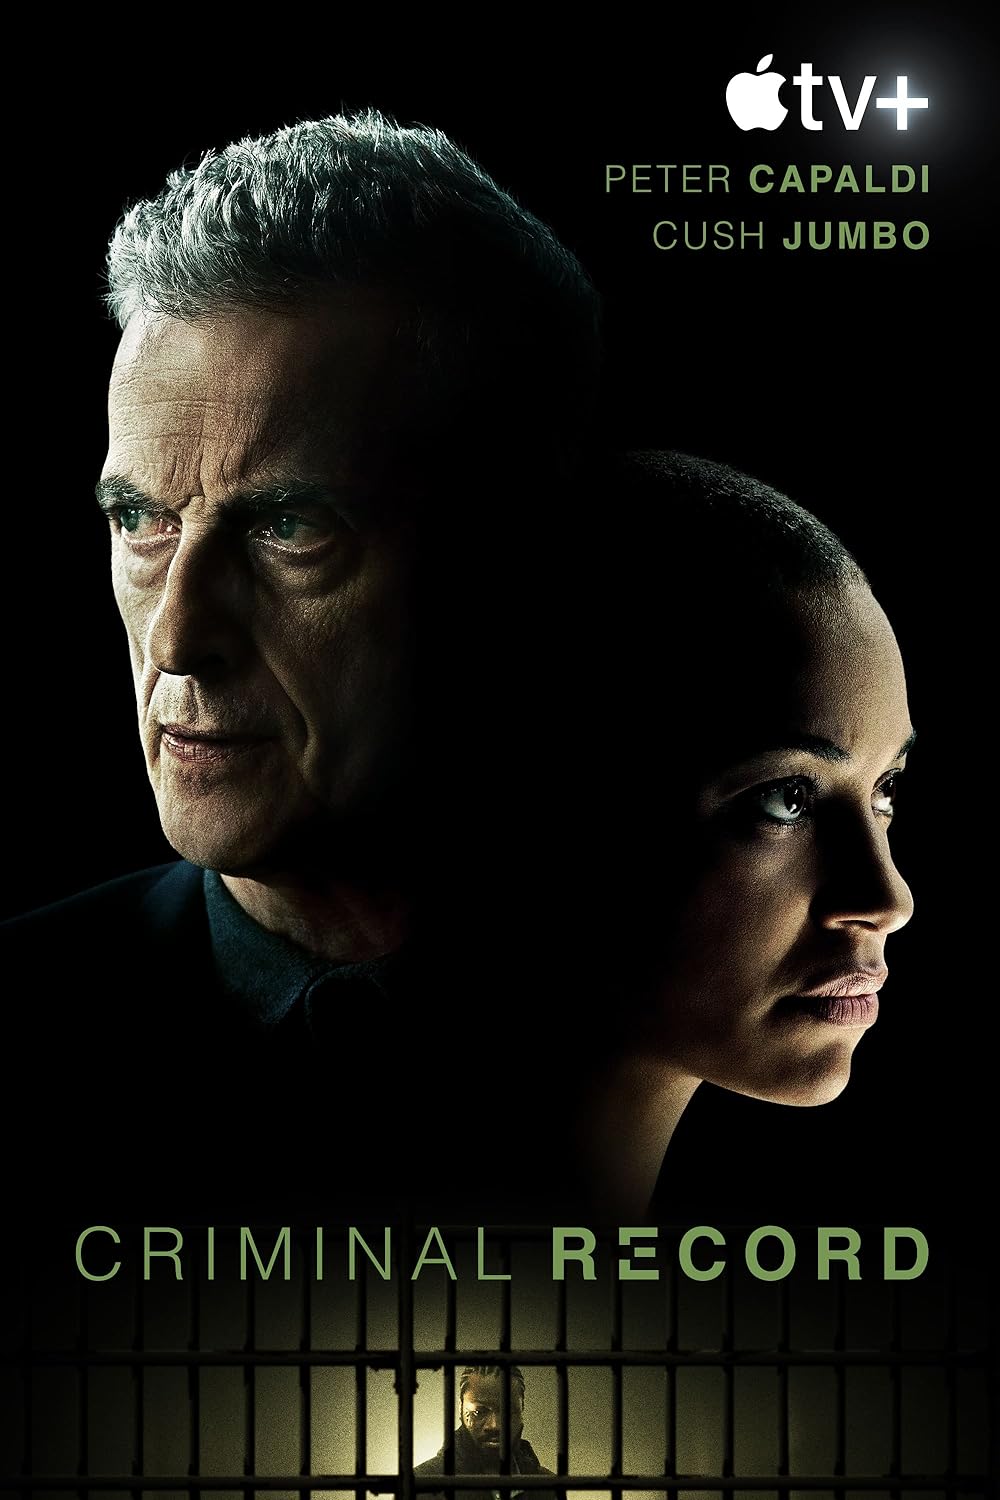 Criminal Record (January 10) - Streaming on Apple TV+
The British crime thriller 'Criminal Record' explores the dynamic between two detectives, played by Peter Capaldi and Cush Jumbo. Triggered by an anonymous call, the detectives delve into a complex investigation of a past murder case, unraveling profound themes such as racial tensions, systemic shortcomings, and the pursuit of unity in a fractured Britain.